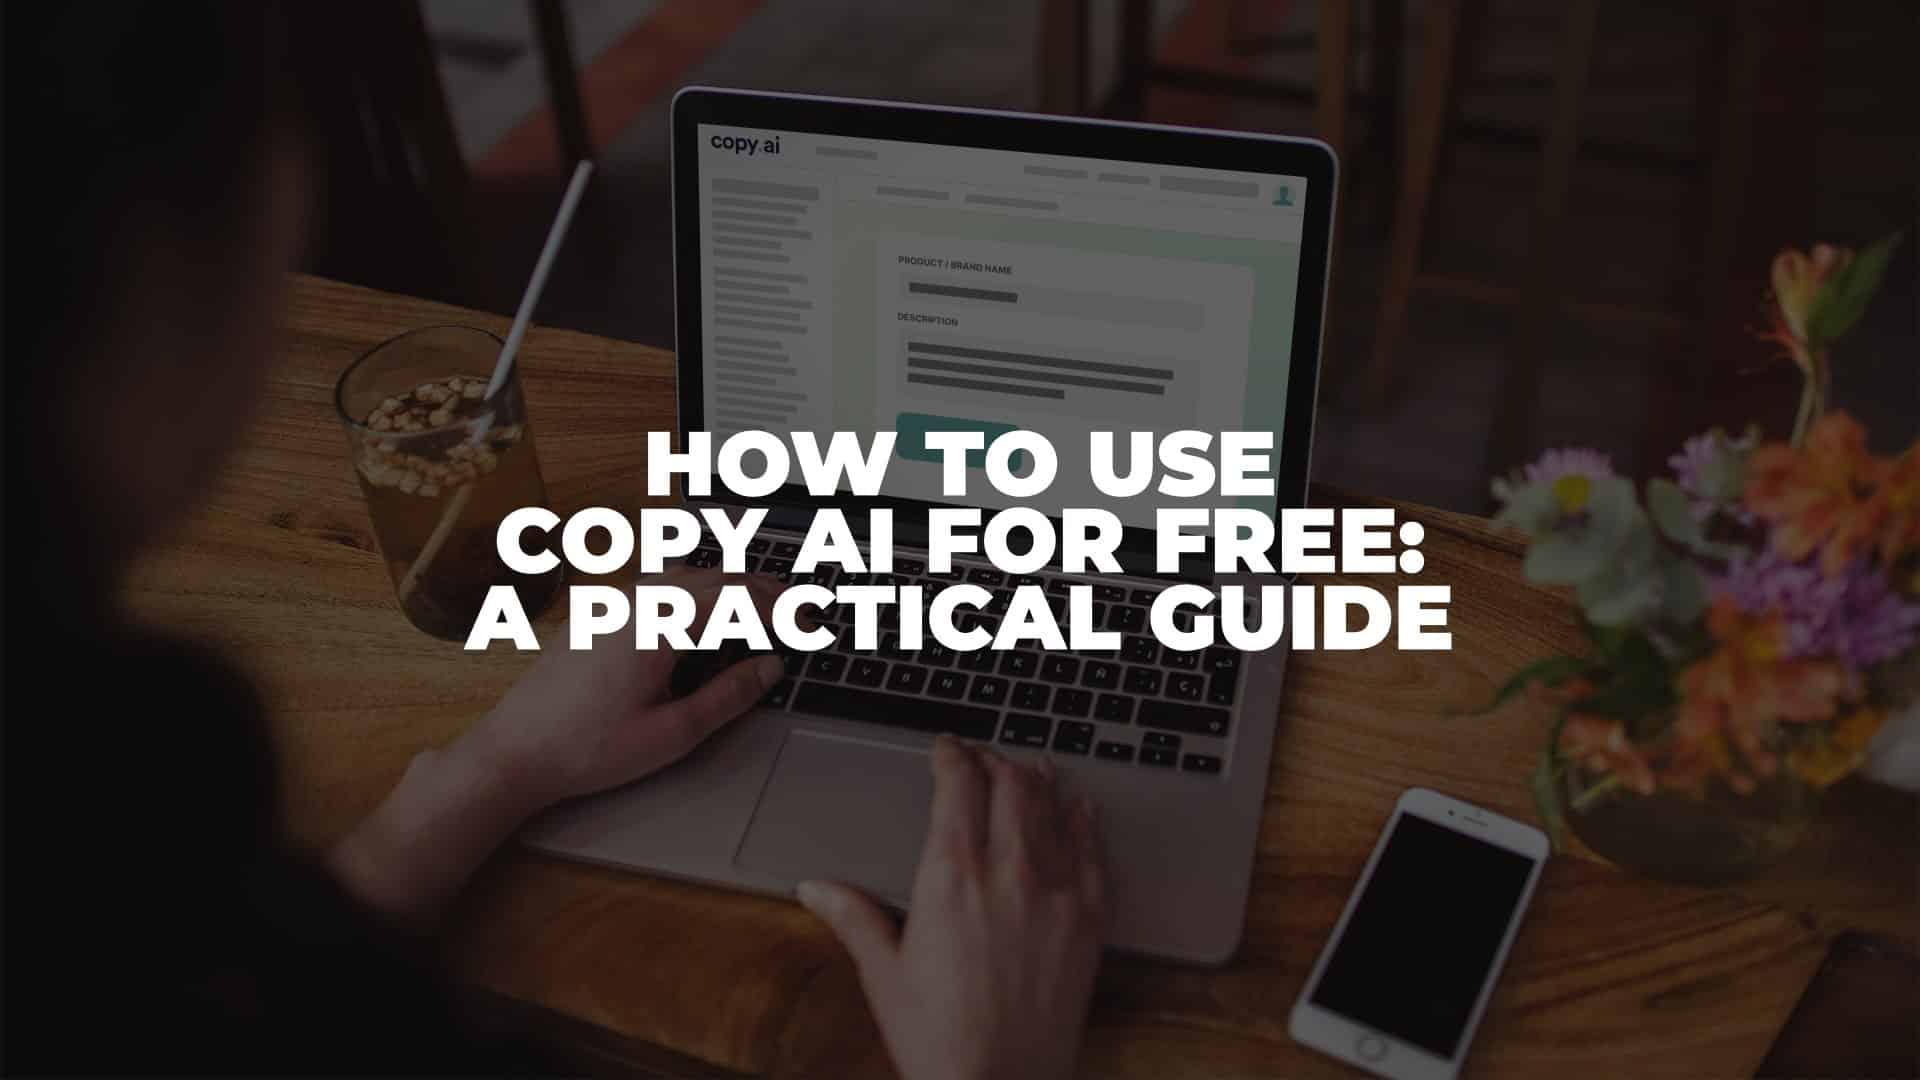 How to Use Copy AI For Free - Featured Image